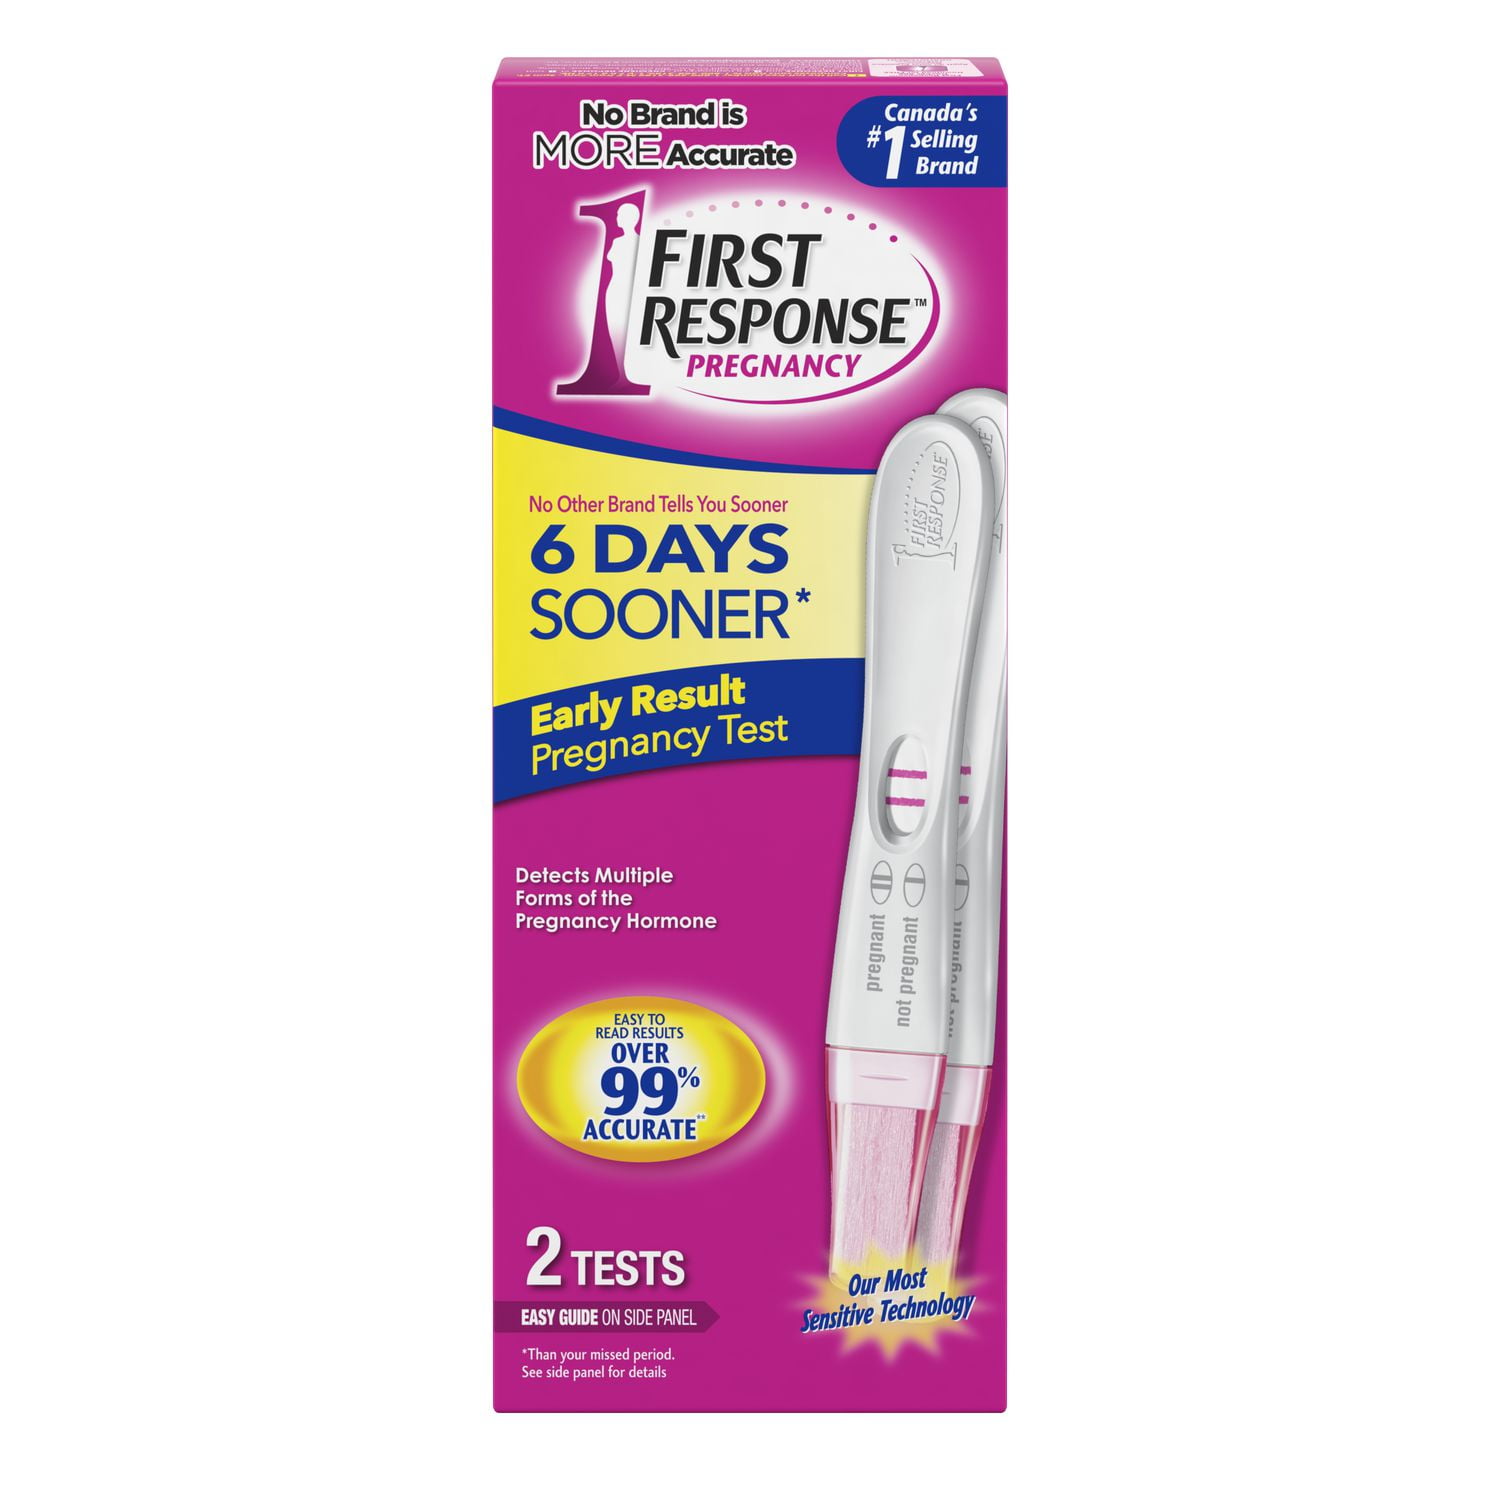 Early Morning - The Most Accurate Time for a Pregnancy Test – Fairhaven  Health